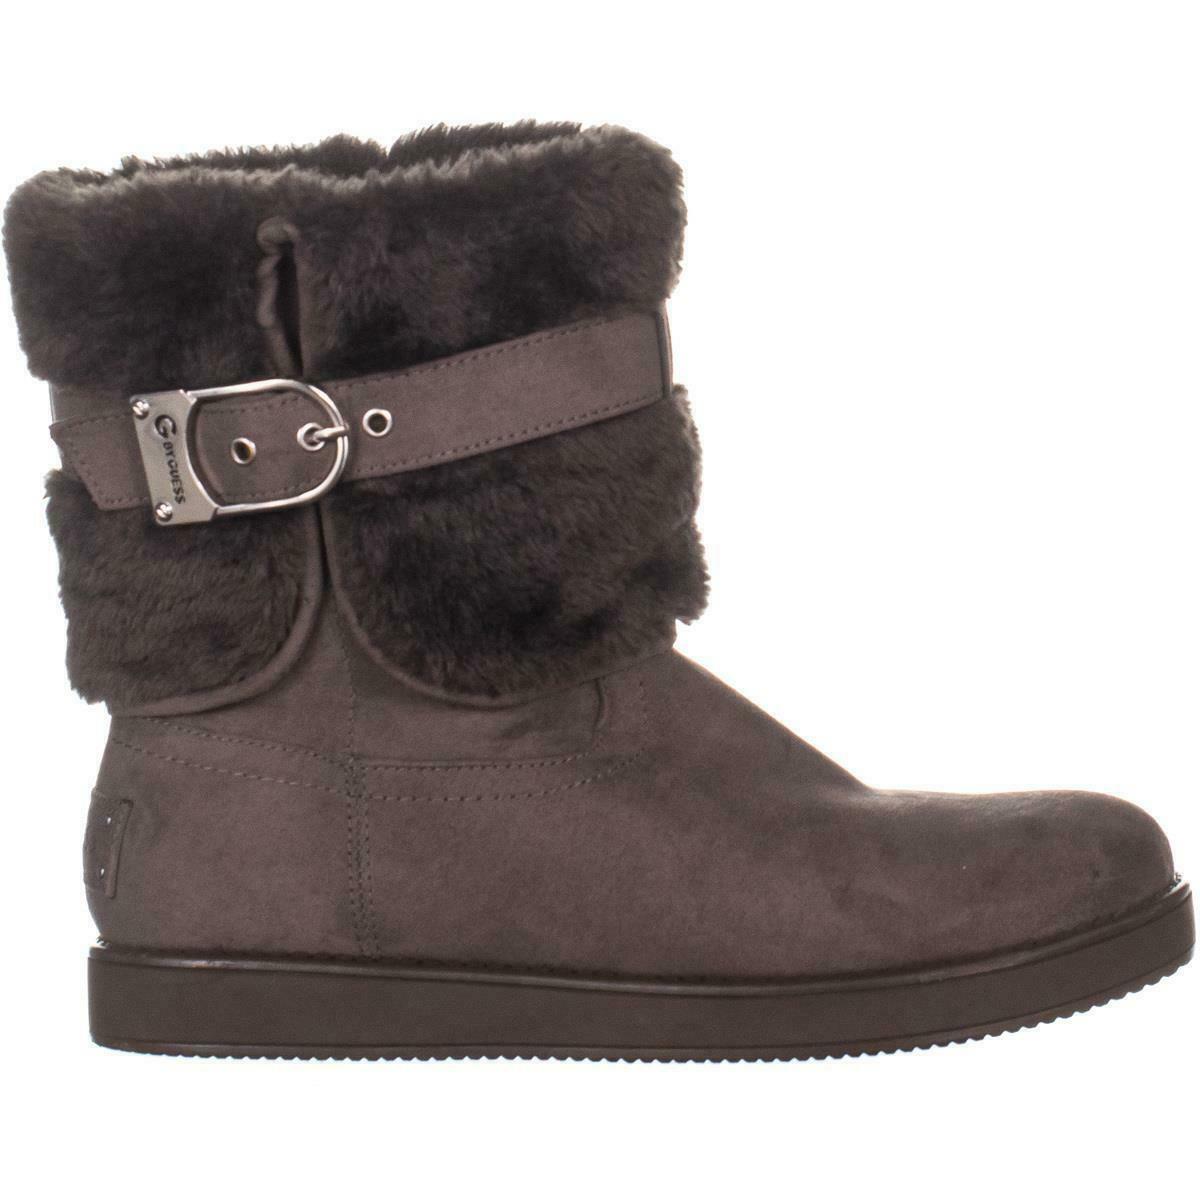 G By Guess Aussie Winter Boots 092, Dark Gray, 6.5 US - Boots